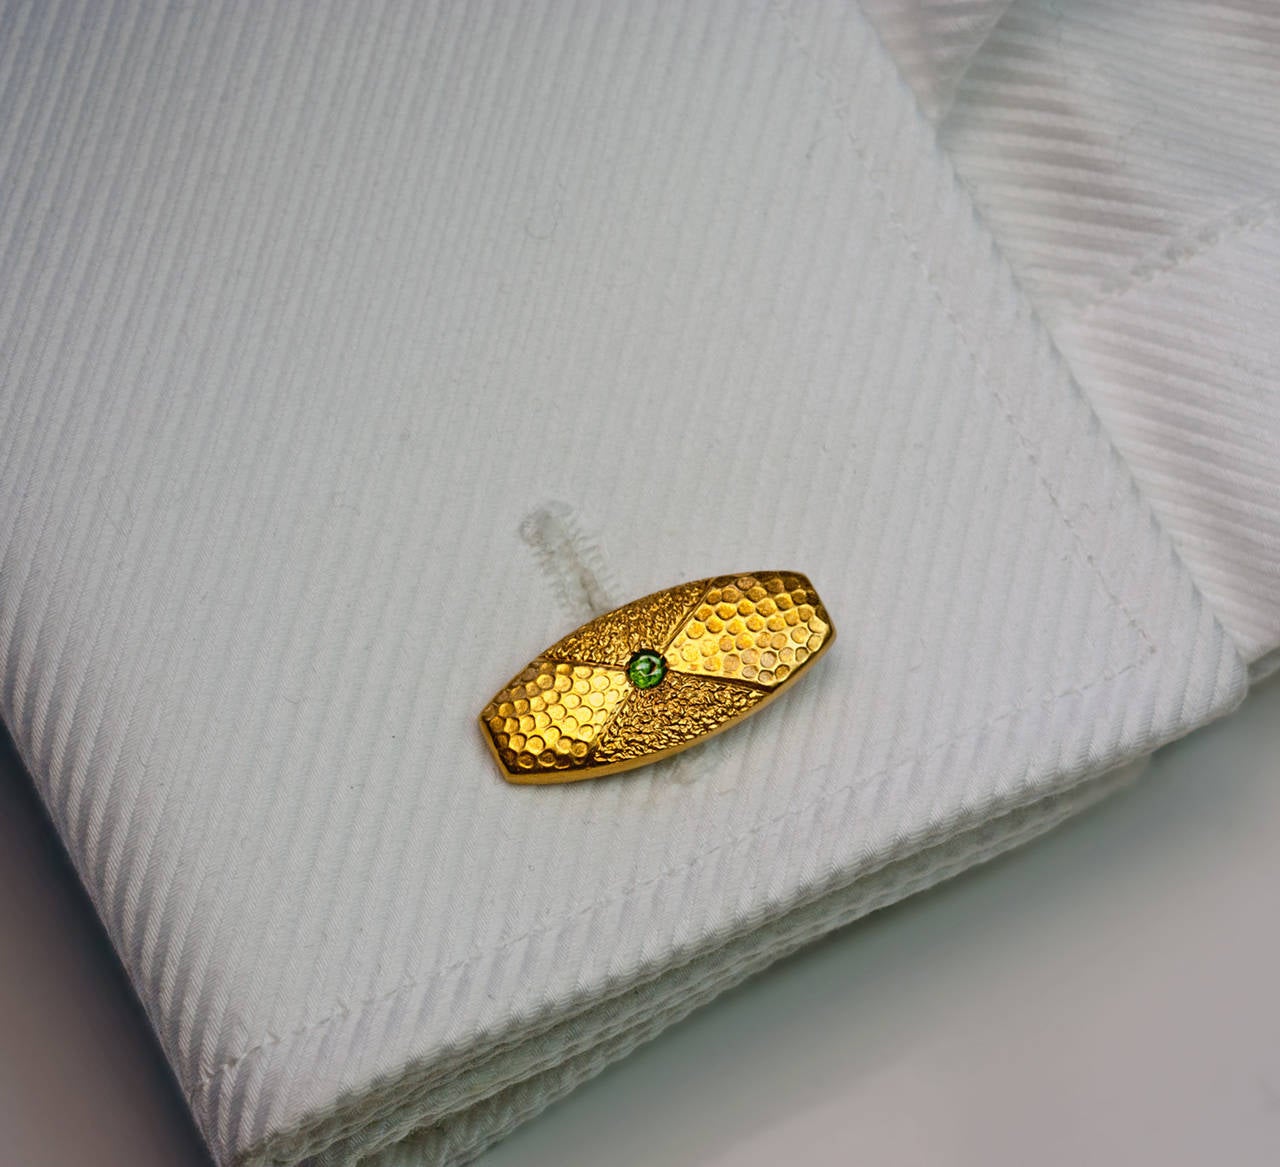 Made in Odessa between 1908 and 1917

14K gold cufflinks designed to imitate hammered and gold nugget surfaces, each centered with a Russian demantoid garnet

Marked with maker's initials and 56 zolotnik gold standard

Width 22 mm (7/8 in.)